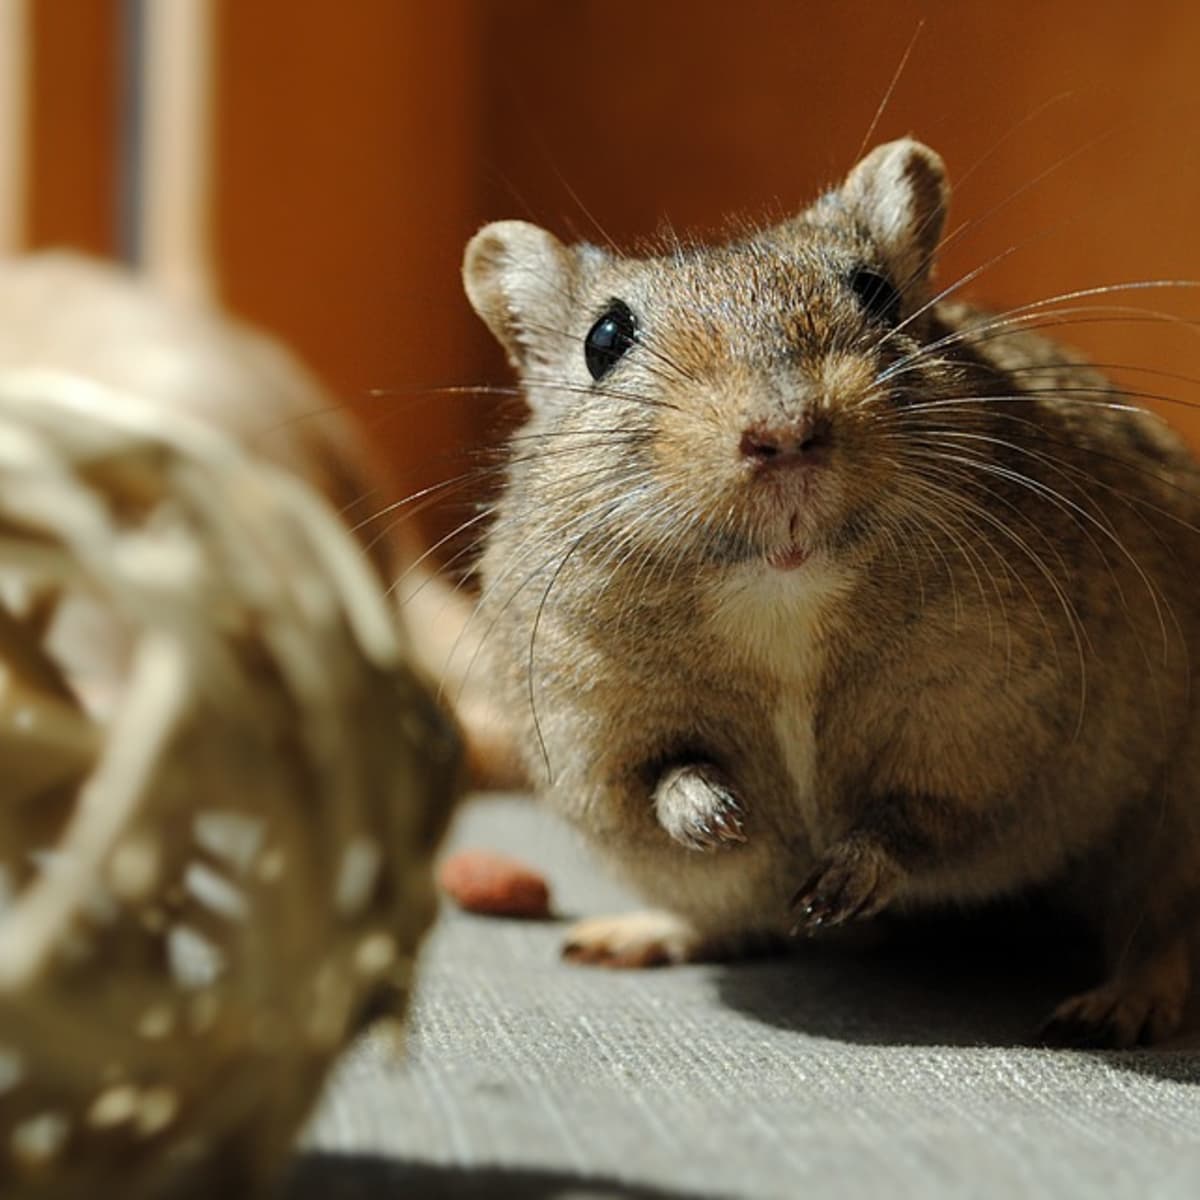 A hamster sitting on the ground next to a ball.